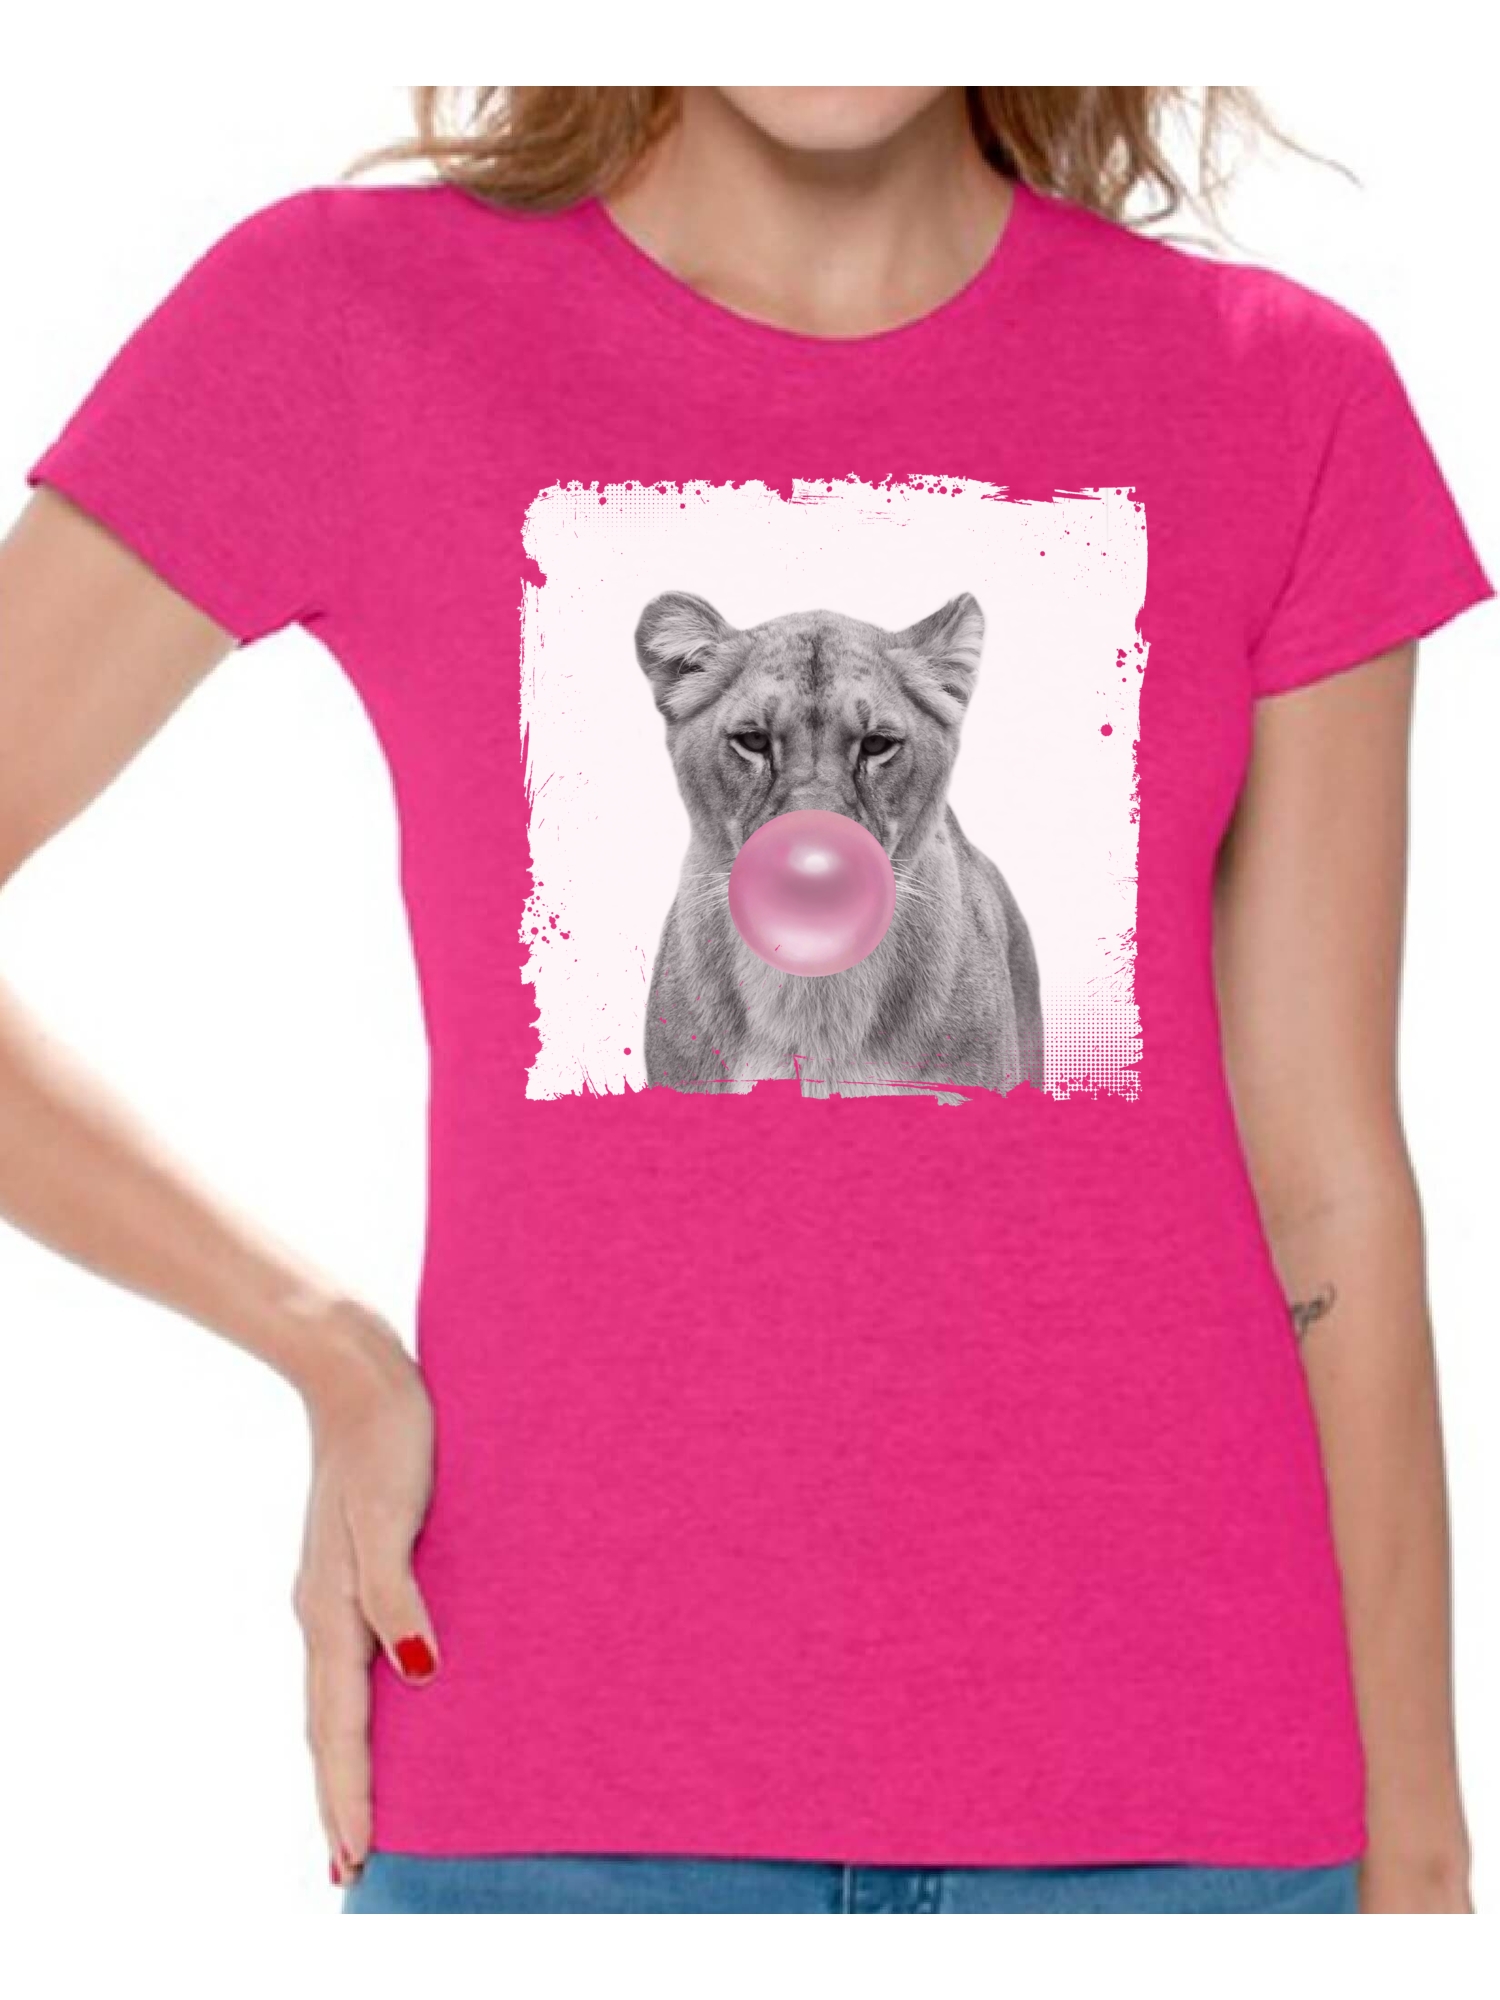 Awkward Styles Pink Bubble Shirts Lion T Shirt Cute Animal T Shirt Lion Shirt Women T Shirt Lion Blowing Gum T Shirt Animal Clothes T-Shirt for Woman Funny Animal Lovers Gifts for Her Lion Clothing - image 1 of 4